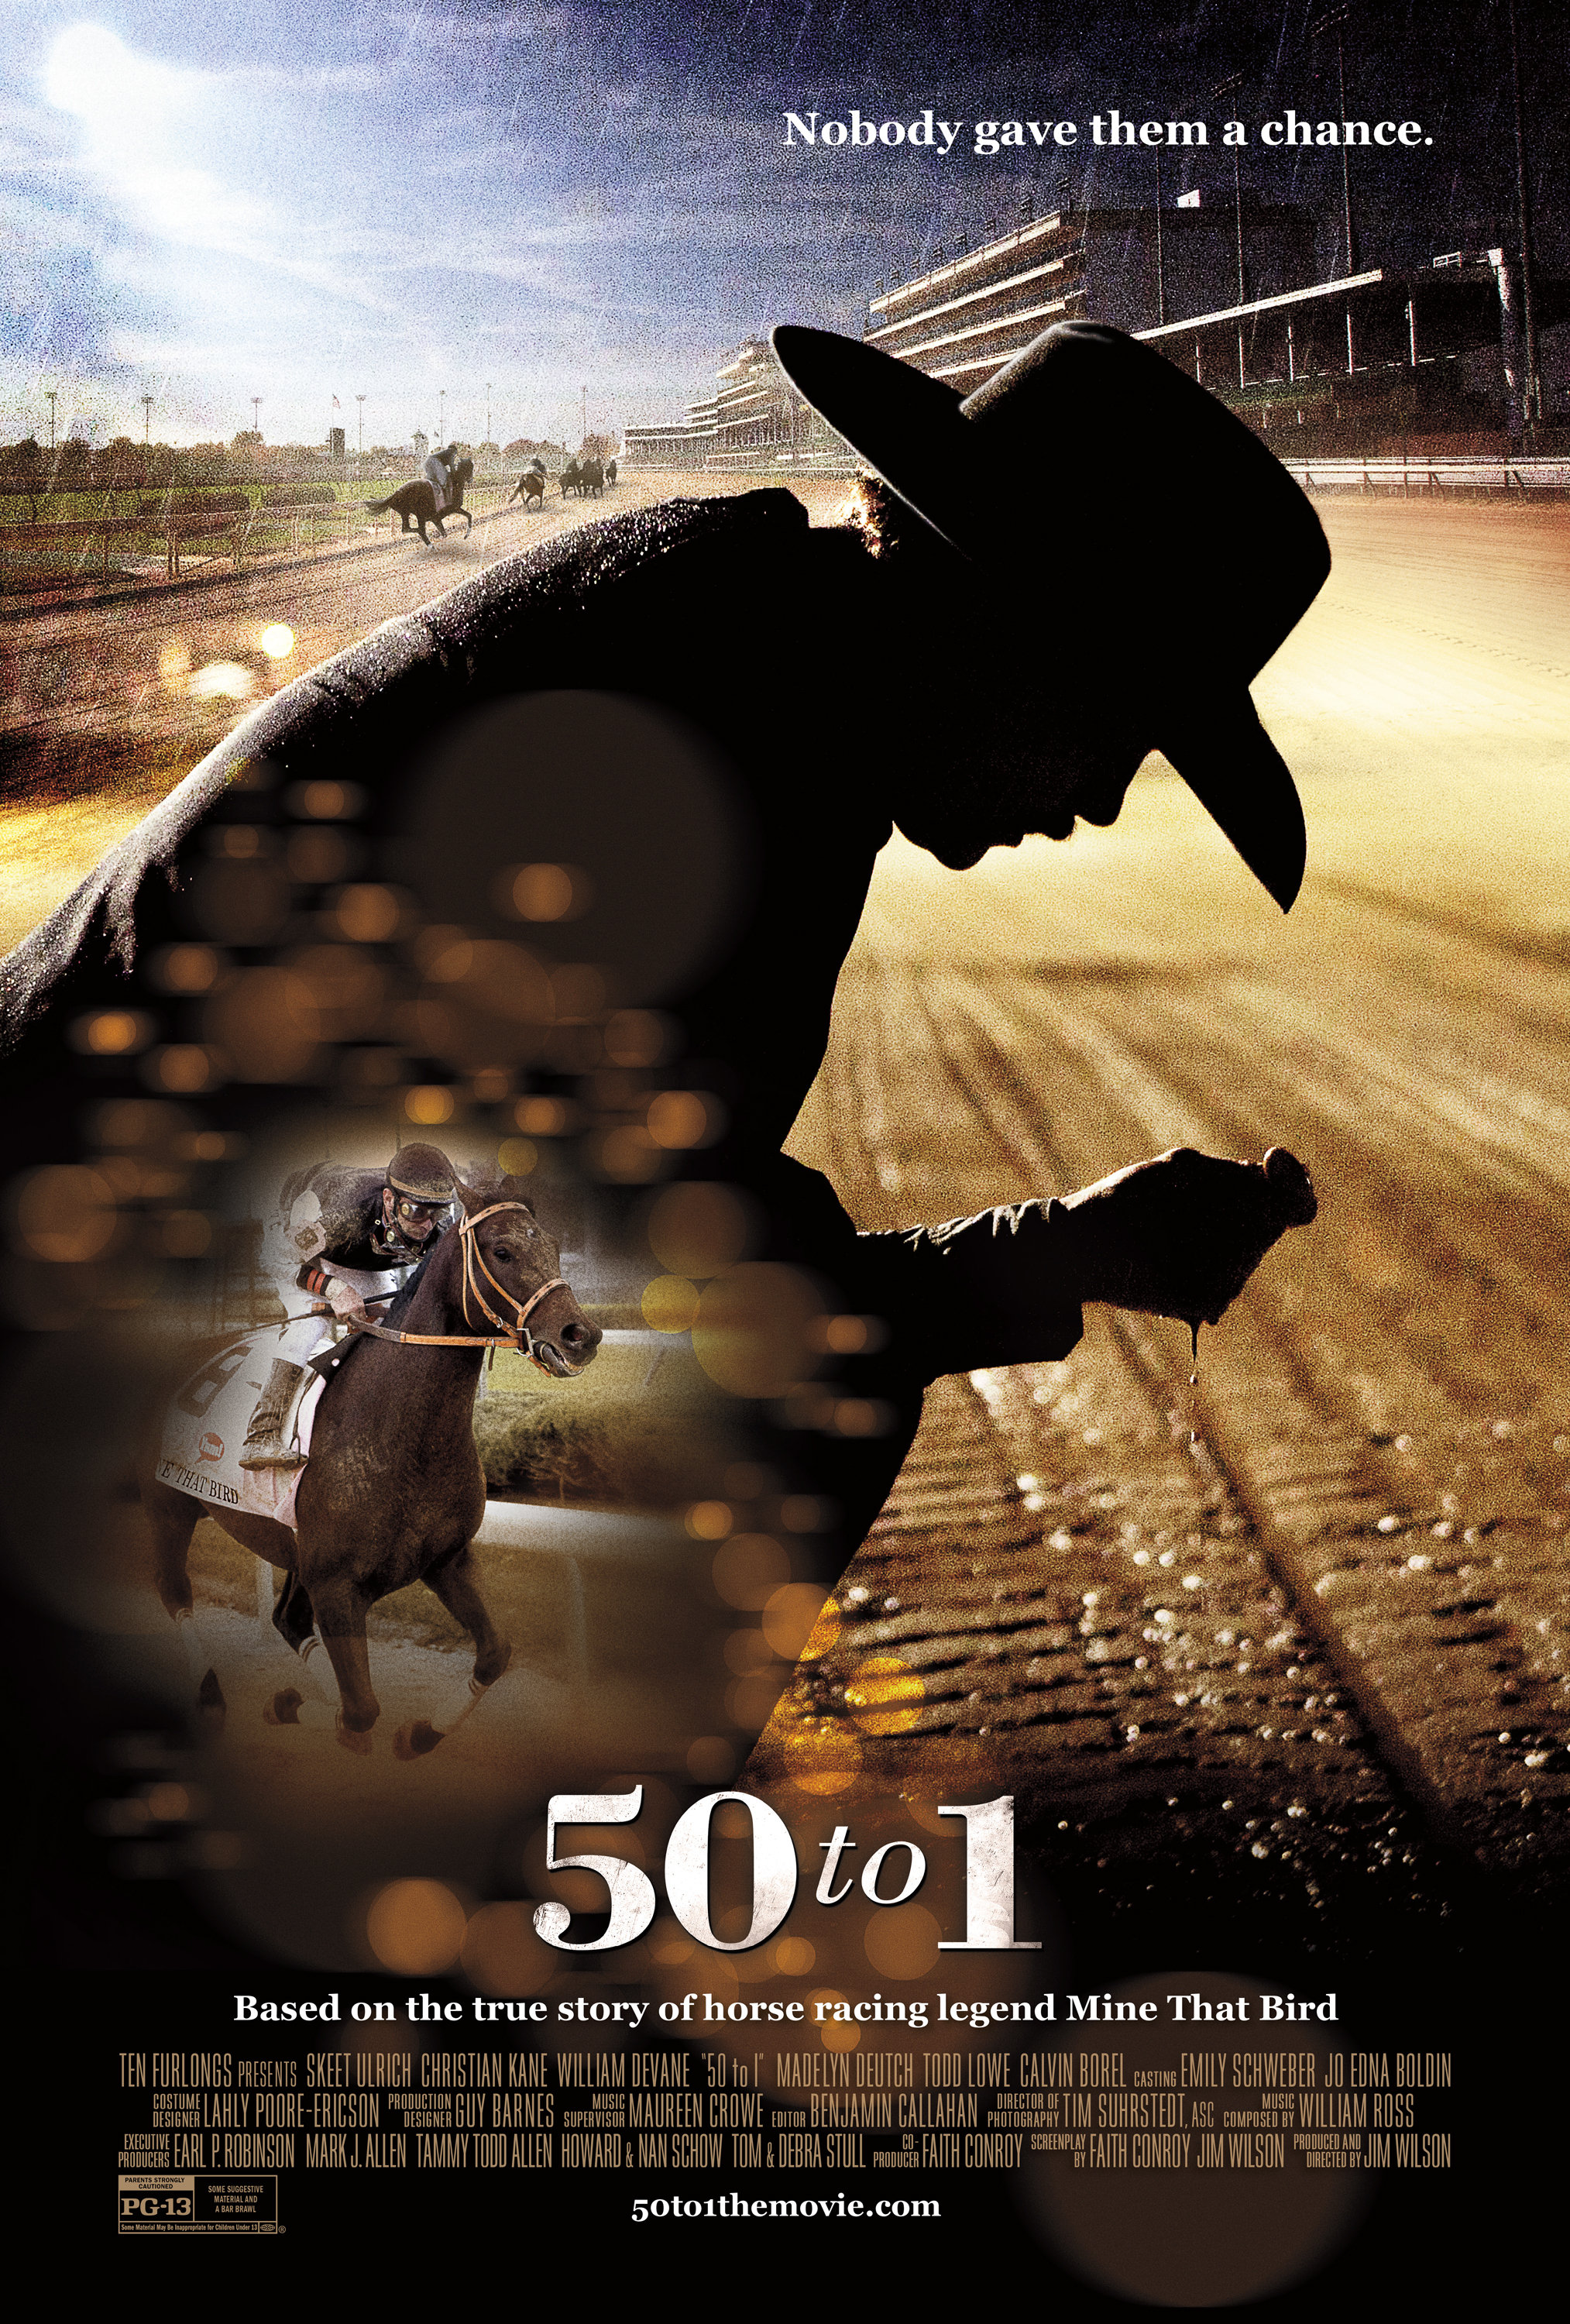 A picture of the horse movie 50 to 1.